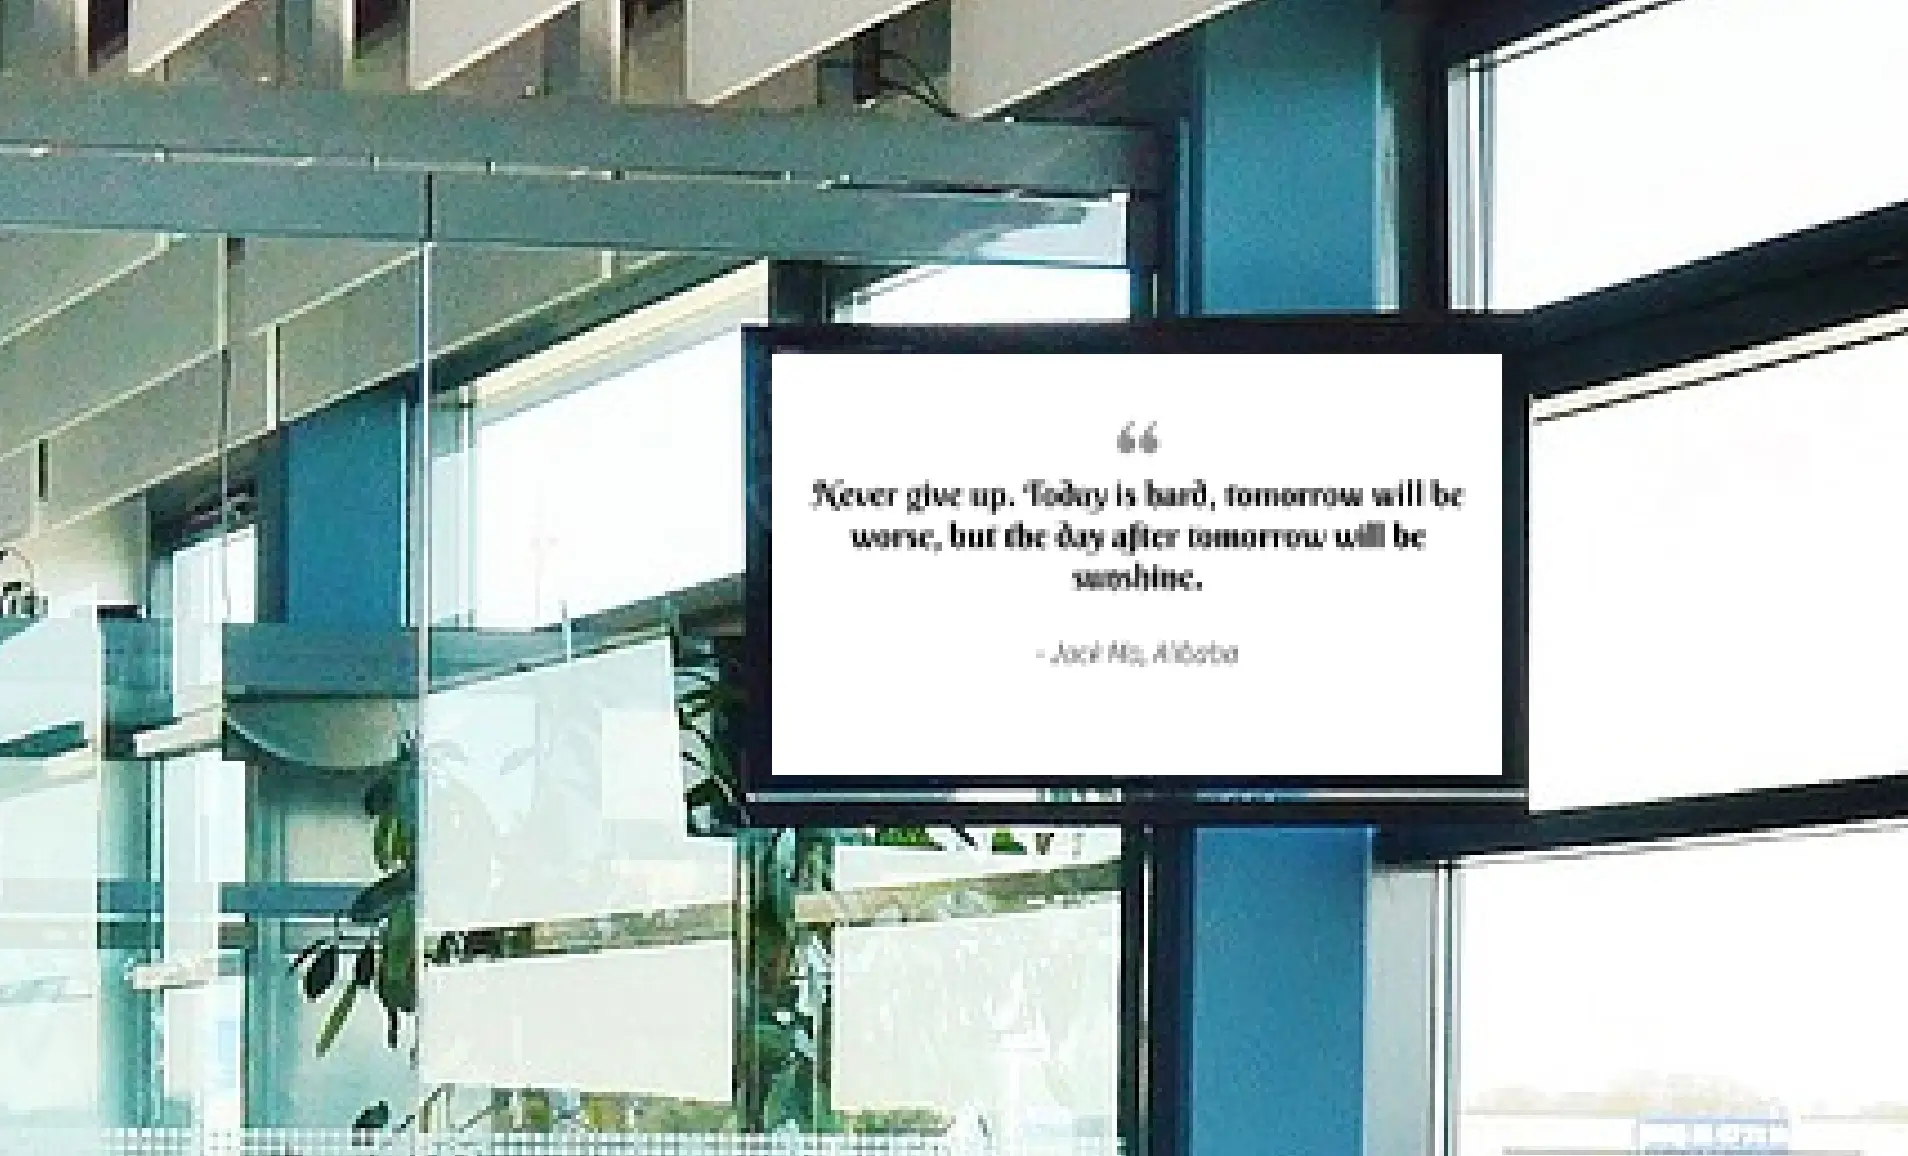 Digital signage screen placed outside meeting room showing motivational quote using Pickcel digital signage software